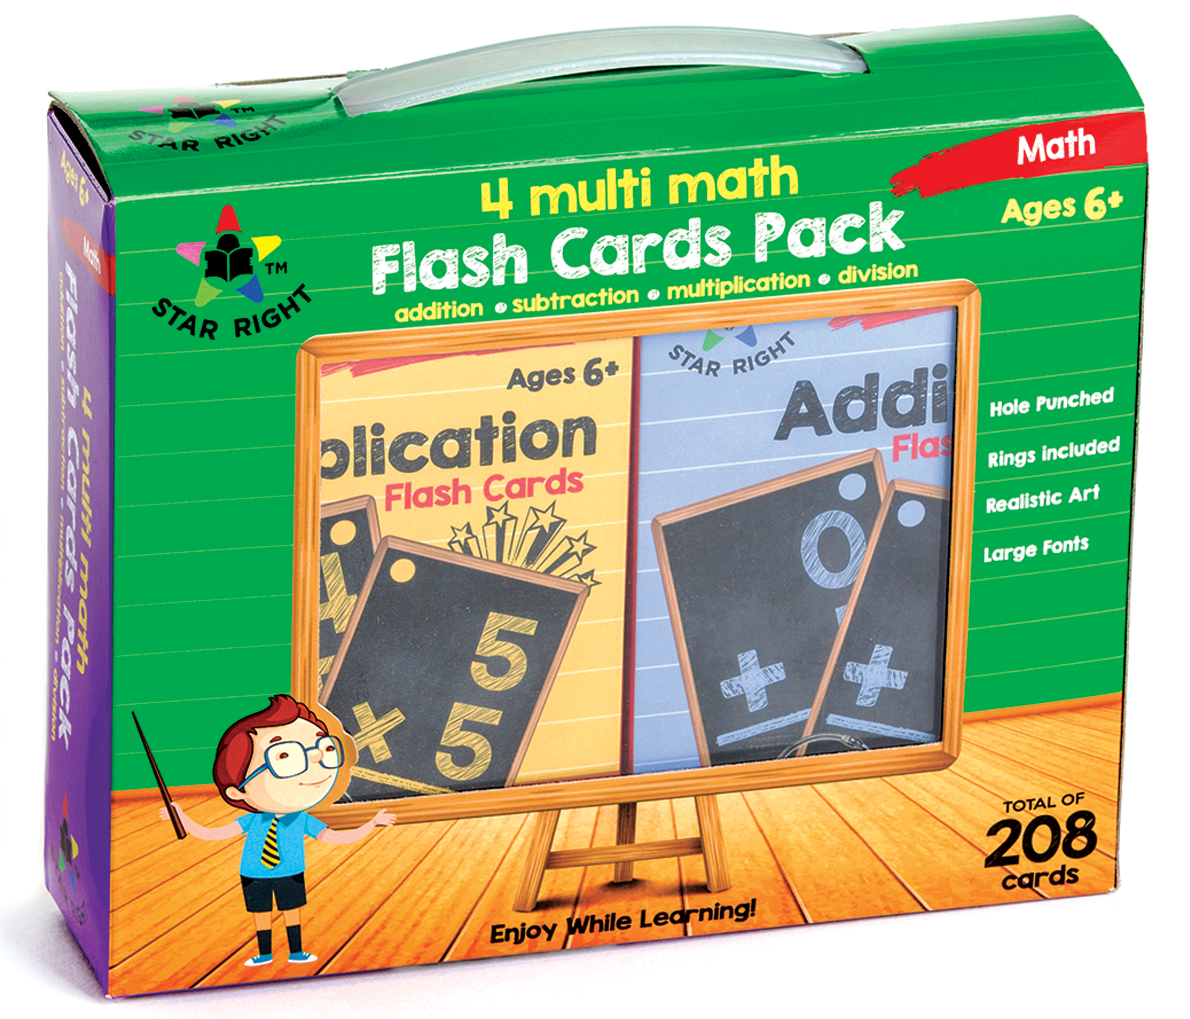 Star Right Multi Math Flash Cards, Set Of 4 - Multiplication, Addition,  Division, Subtraction - Value Pack Flash Cards With Rings For Pre K - K -